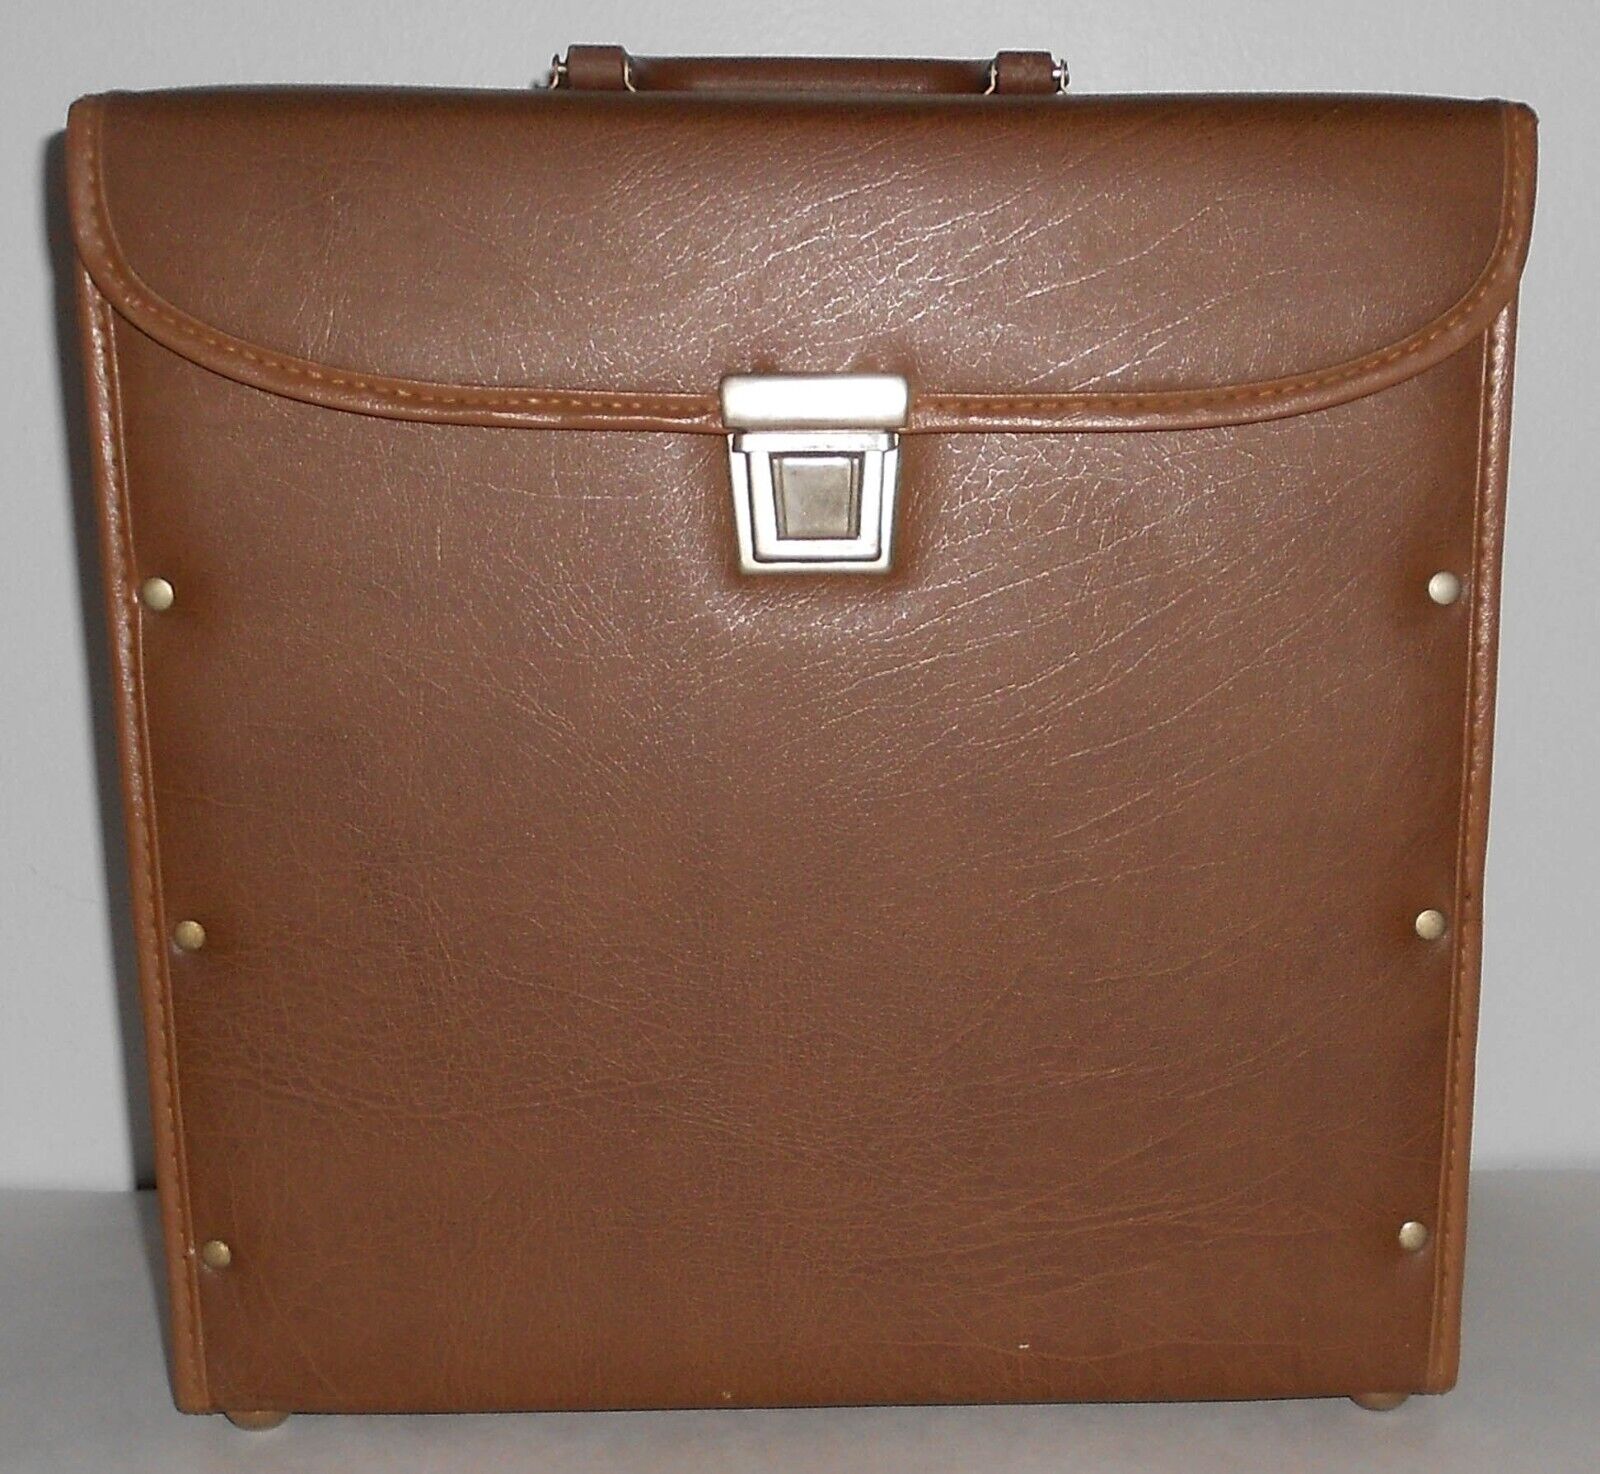 Vintage Brown LP 33 1/3 RPM Record Carry Case Box Holder Carrier - Holds 25 LPs